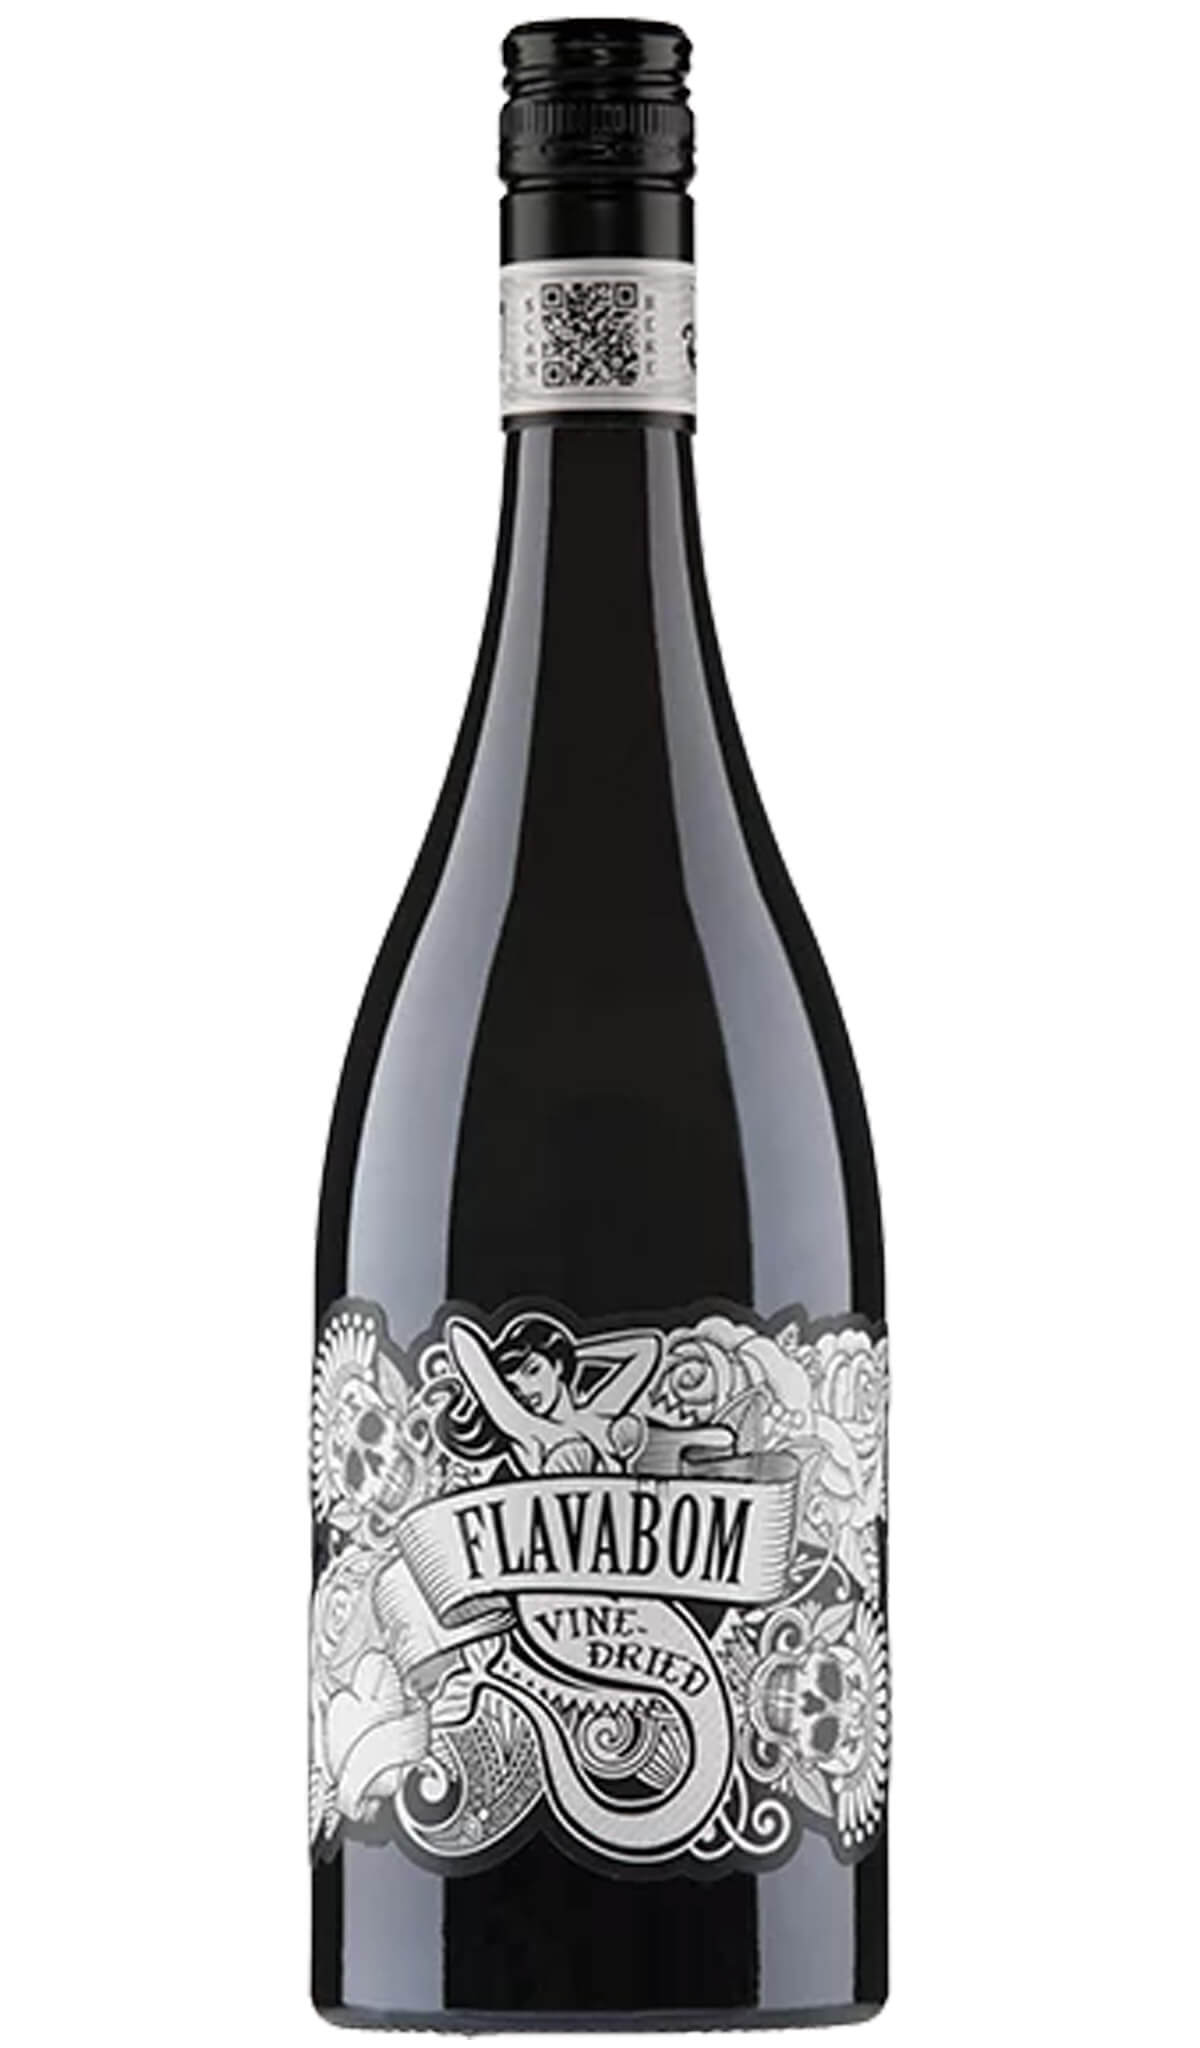 Find out more, explore the range and buy Byrne Vineyards Flavabom Vine Dried Shiraz 2020 (SA Riverland) available online at Wine Sellers Direct - Australia's independent liquor specialists.